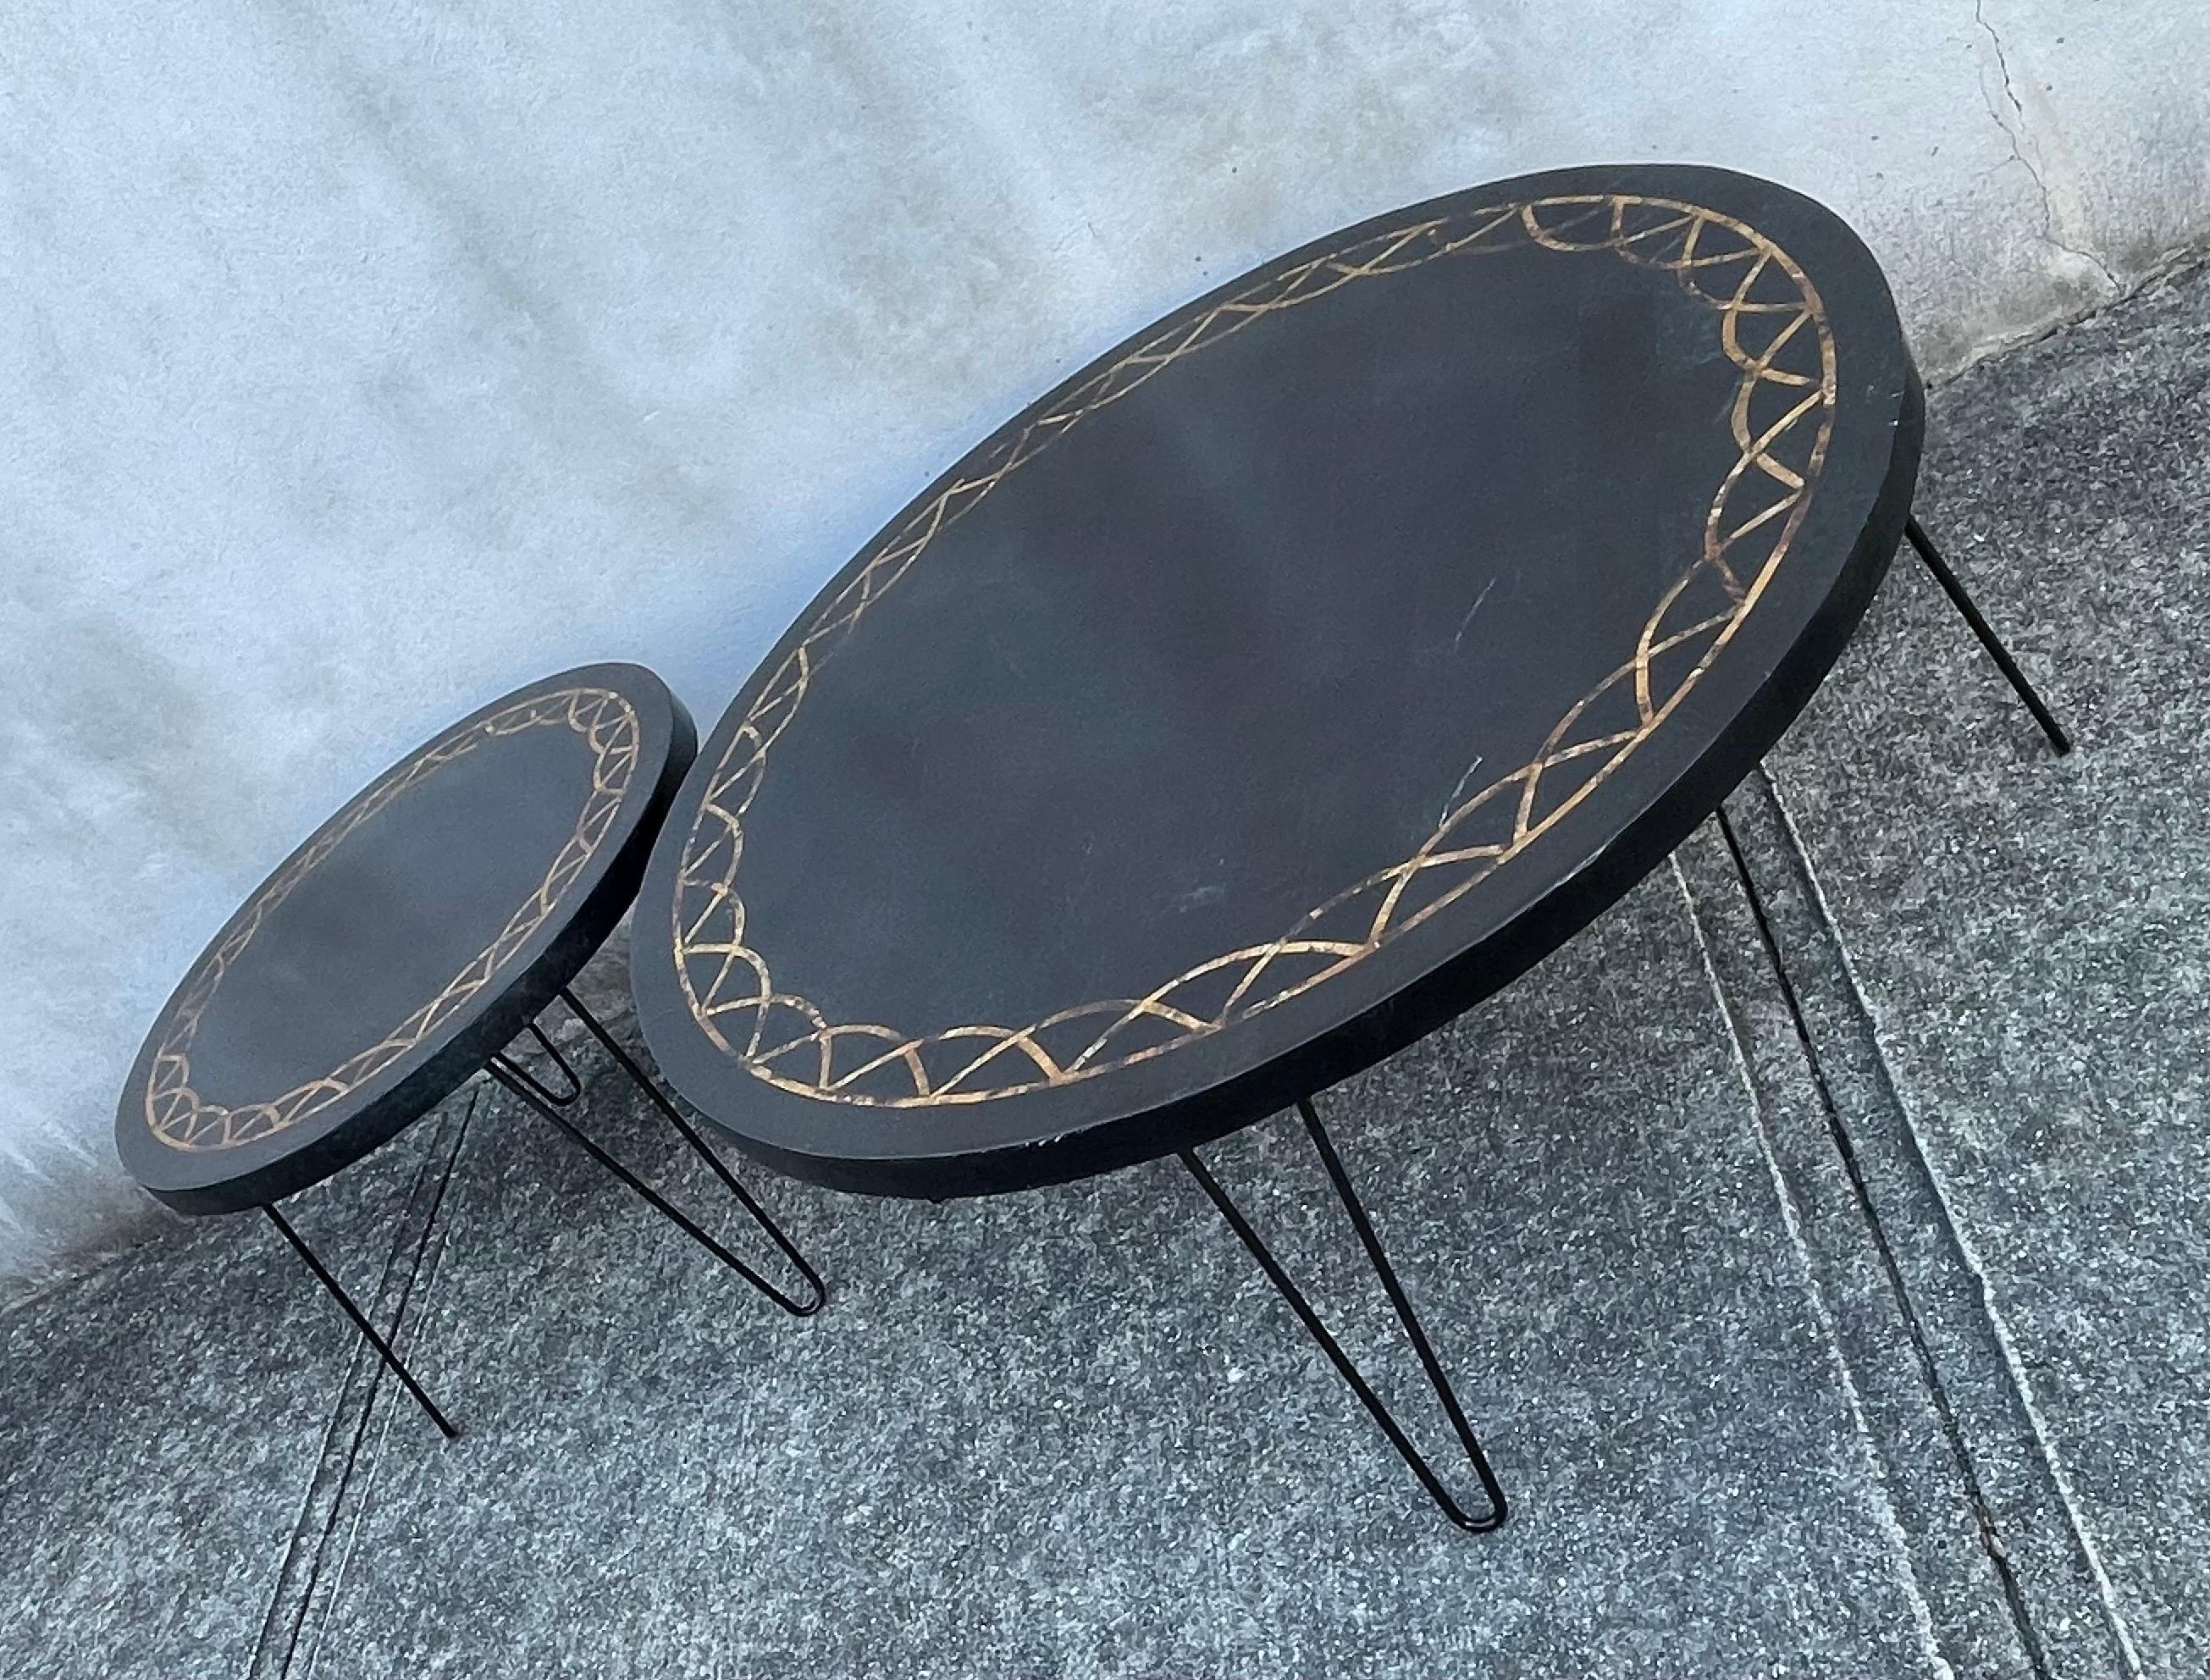 Pair of Mid-Century Modern round coffee tables with hairpin legs. Black faux tiles with gold mosaic inlay. Small table dimensions, 26 inches in diameter by 17.50 inches tall.